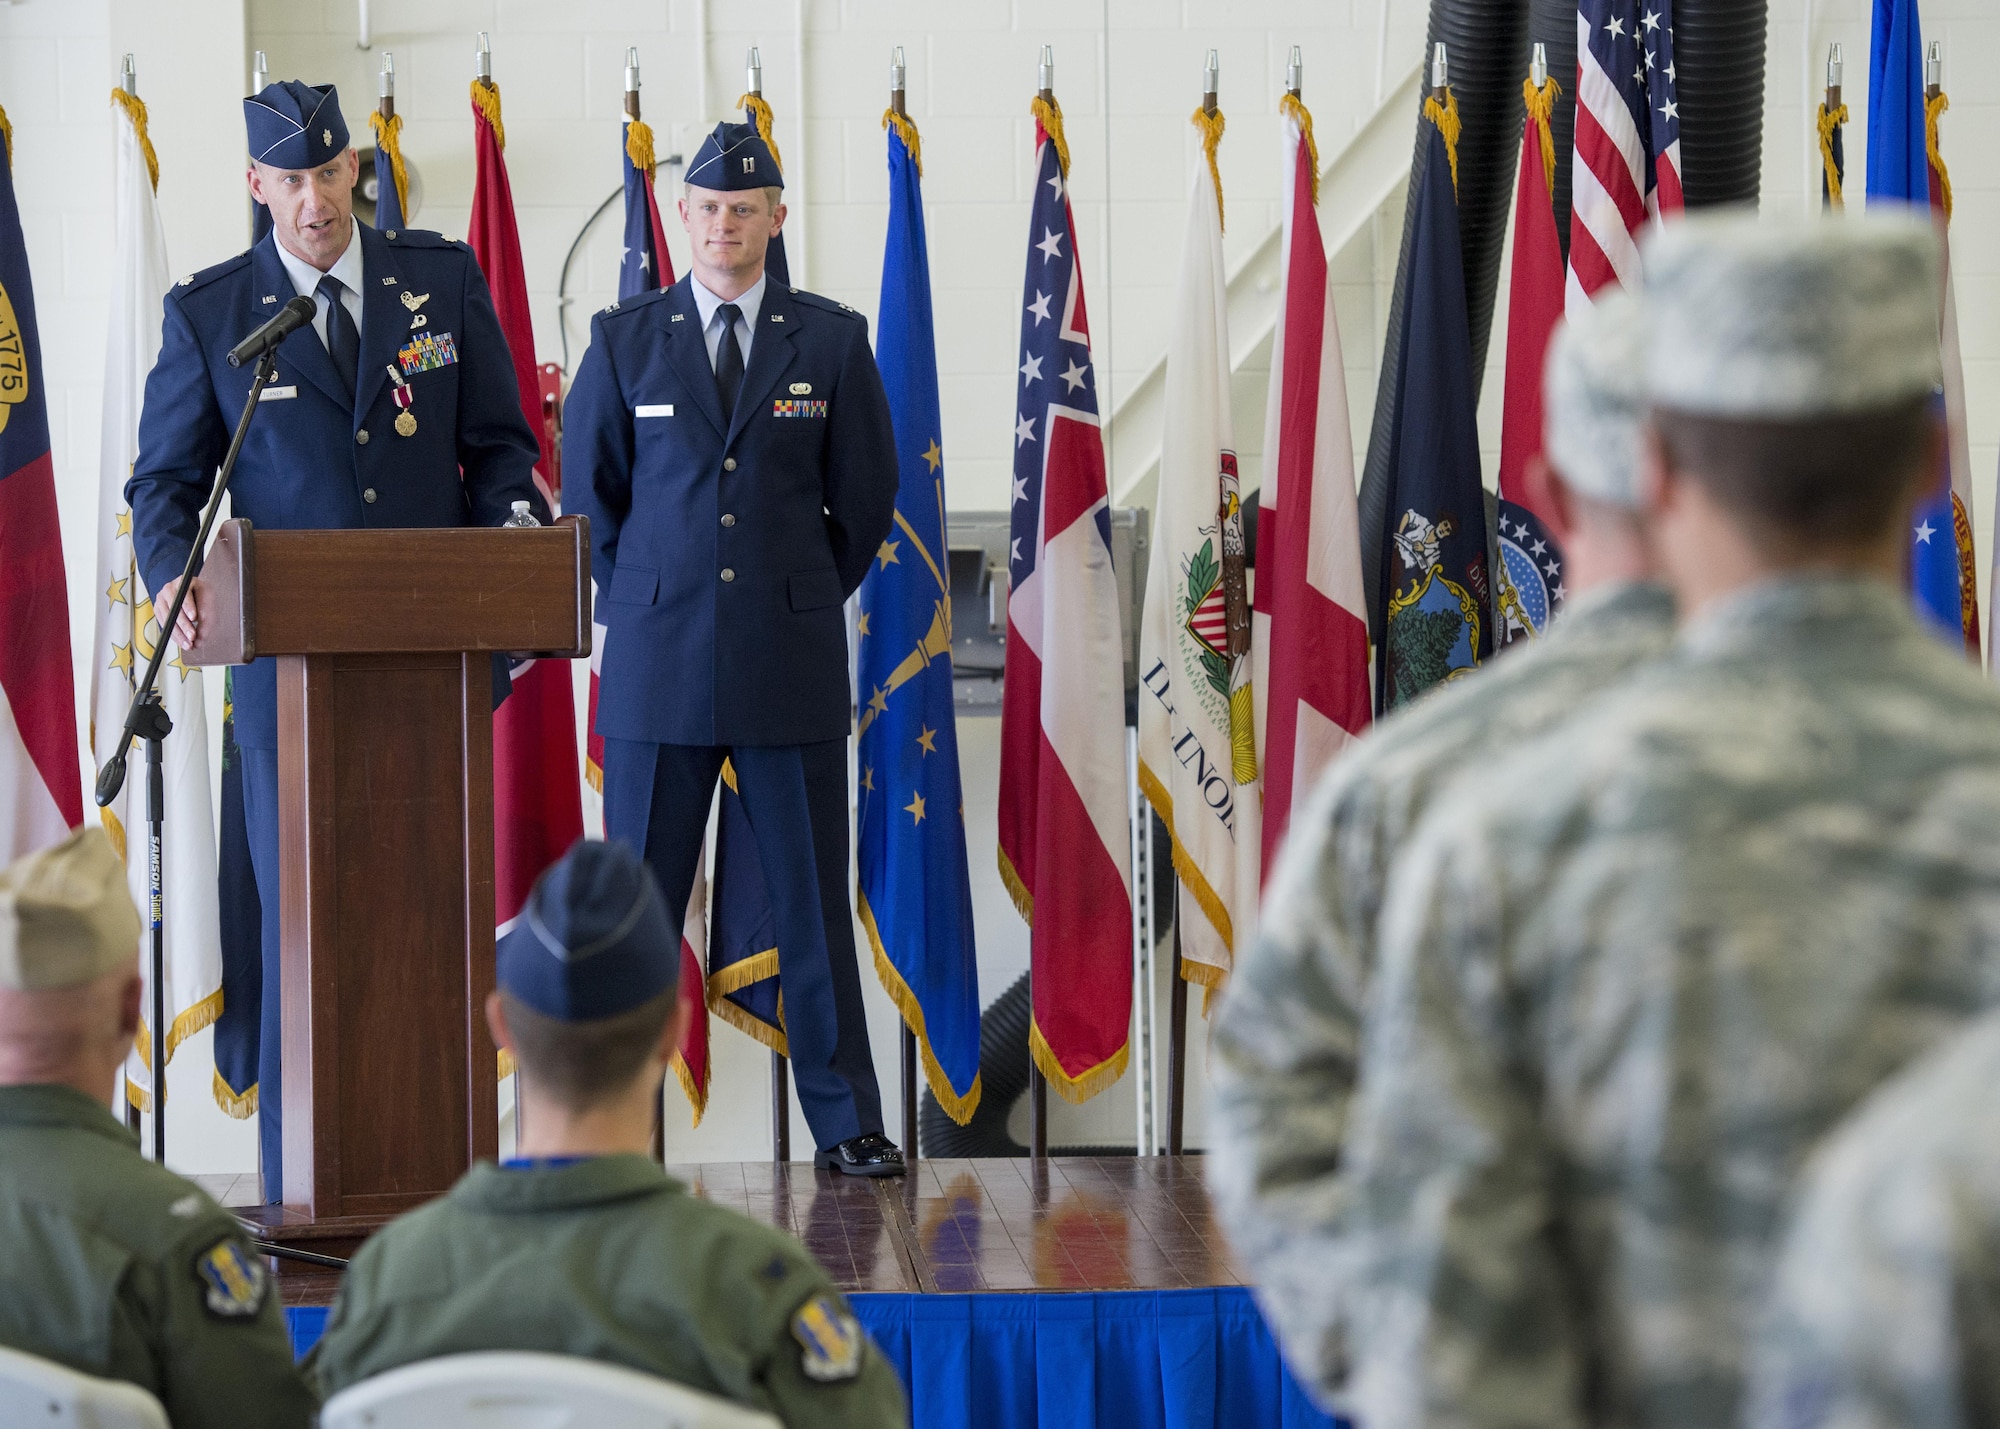 Lt. Col. Bradley Turner, outgoing 33rd Operations Support Squadron commander, thanks 33rd OSS Airmen for their hard work during the 33rd OSS change of command ceremony June 24, 2016, at Eglin Air Force Base, Fla. The 33rd OSS oversees F-35 weapons and tactics training and aircrew flight equipment training at Eglin AFB as well as the training syllabus and operational intelligence training for both AFSOC and the F-35 program at Eglin AFB. (U.S. Air Force photo by Senior Airman Stormy Archer/Released)